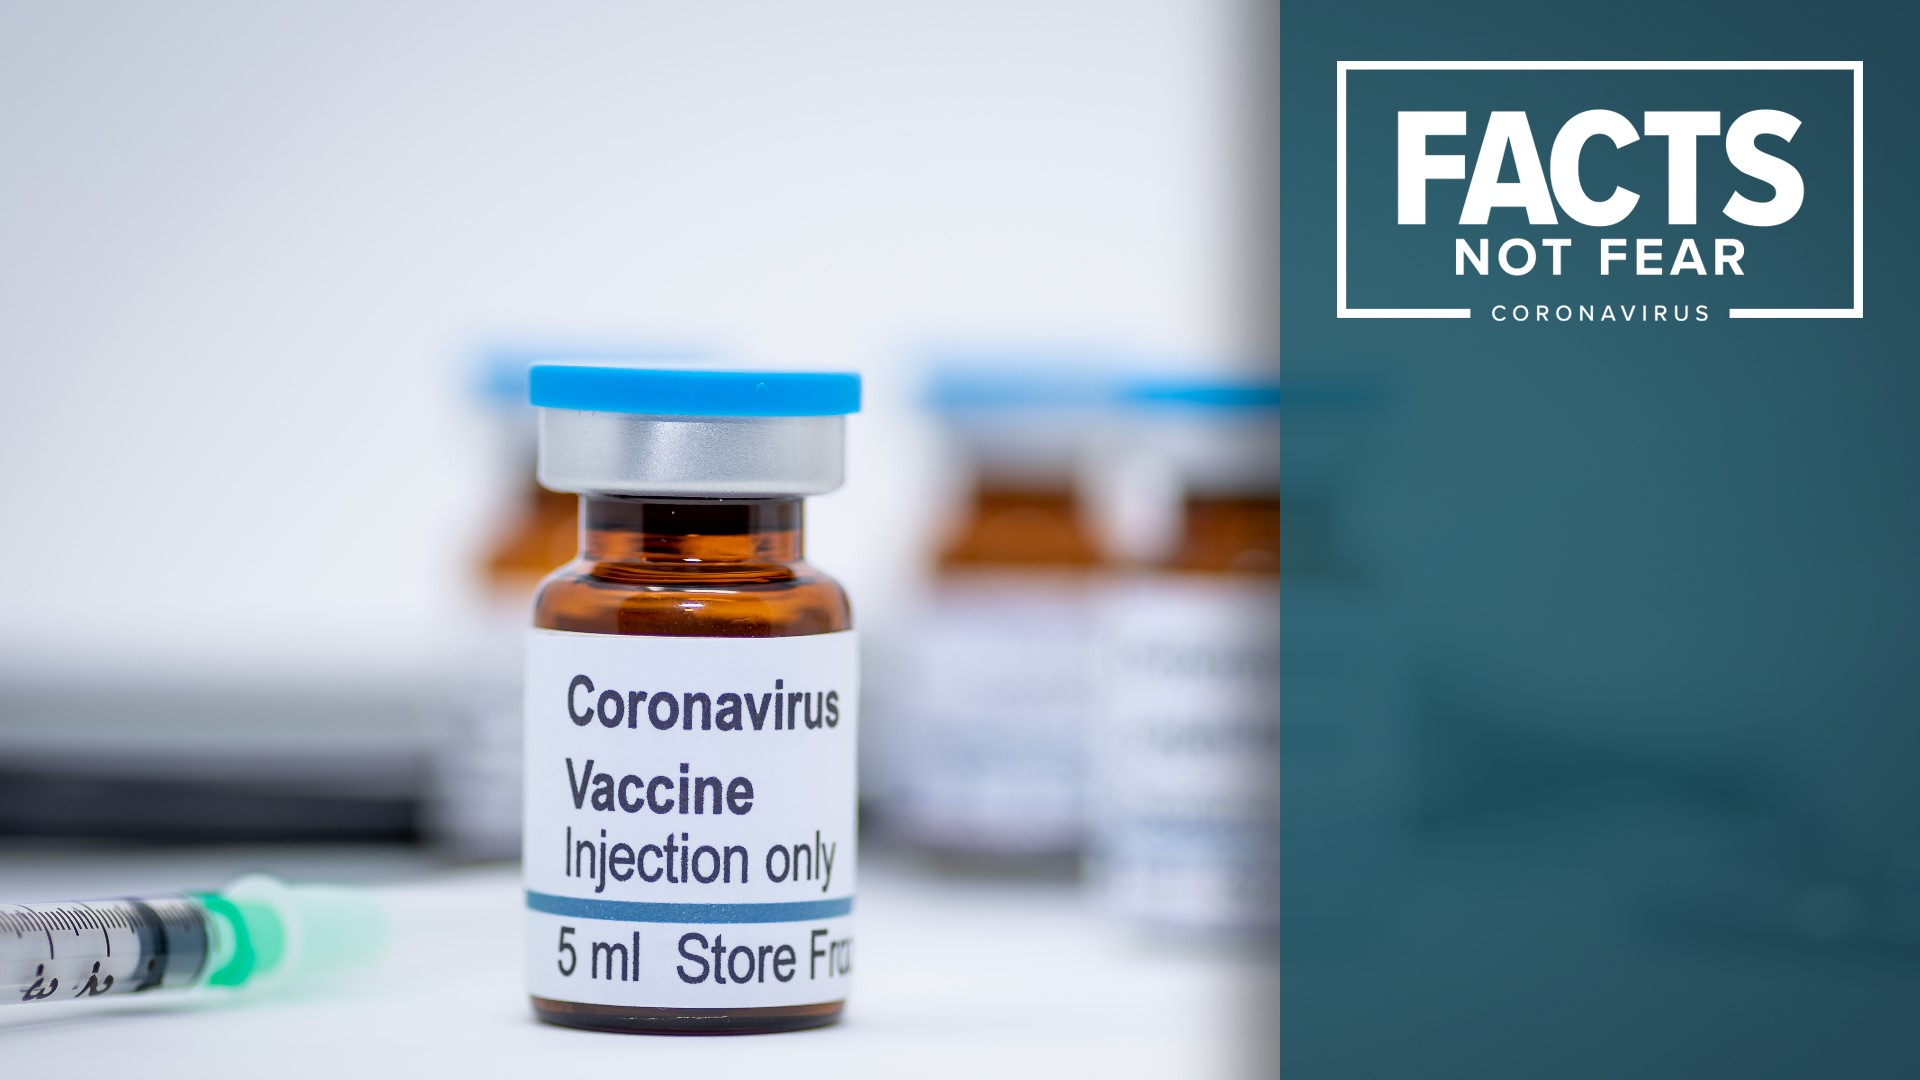 Falling for coronavirus scams can empty your pocketbook or wallet in minutes. Don't be fooled.